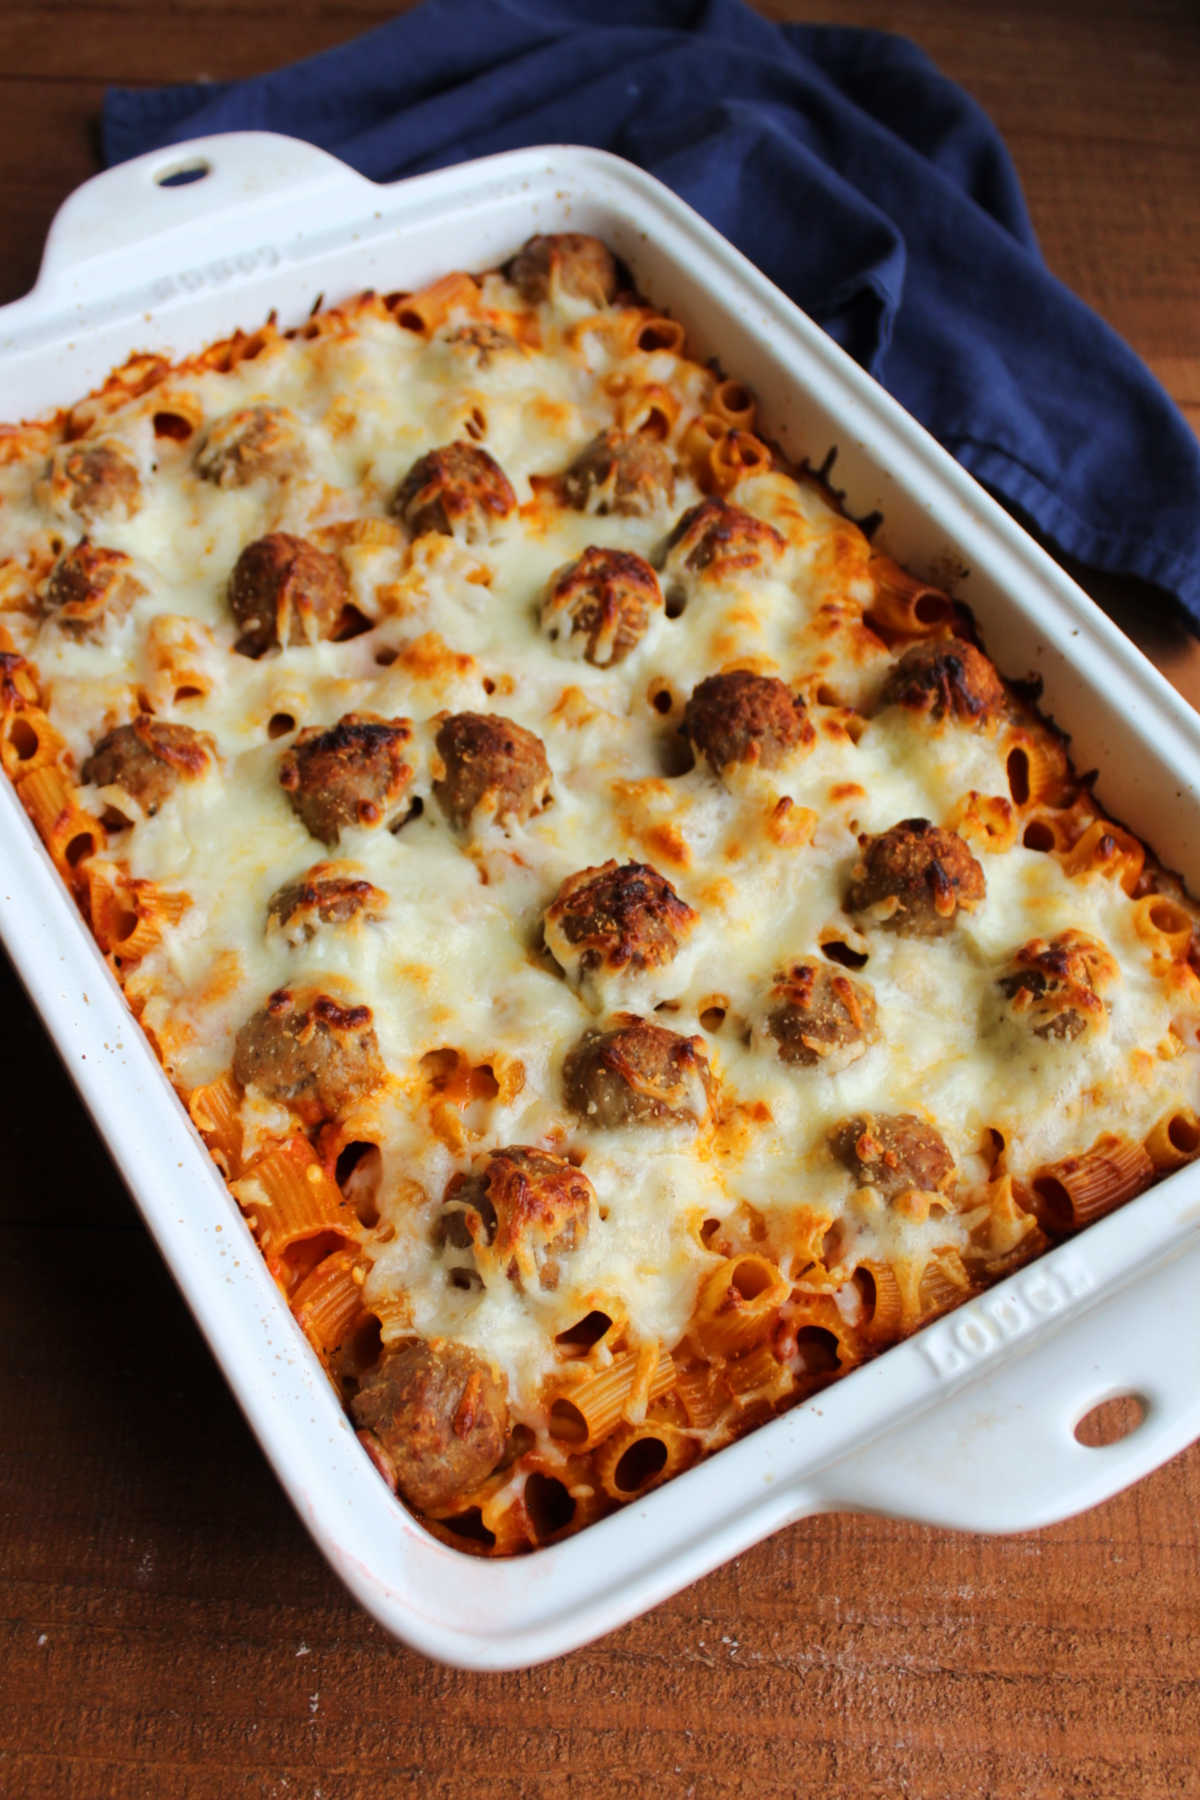 Baked pasta casserole with meatballs and golden brown melted cheese on top.